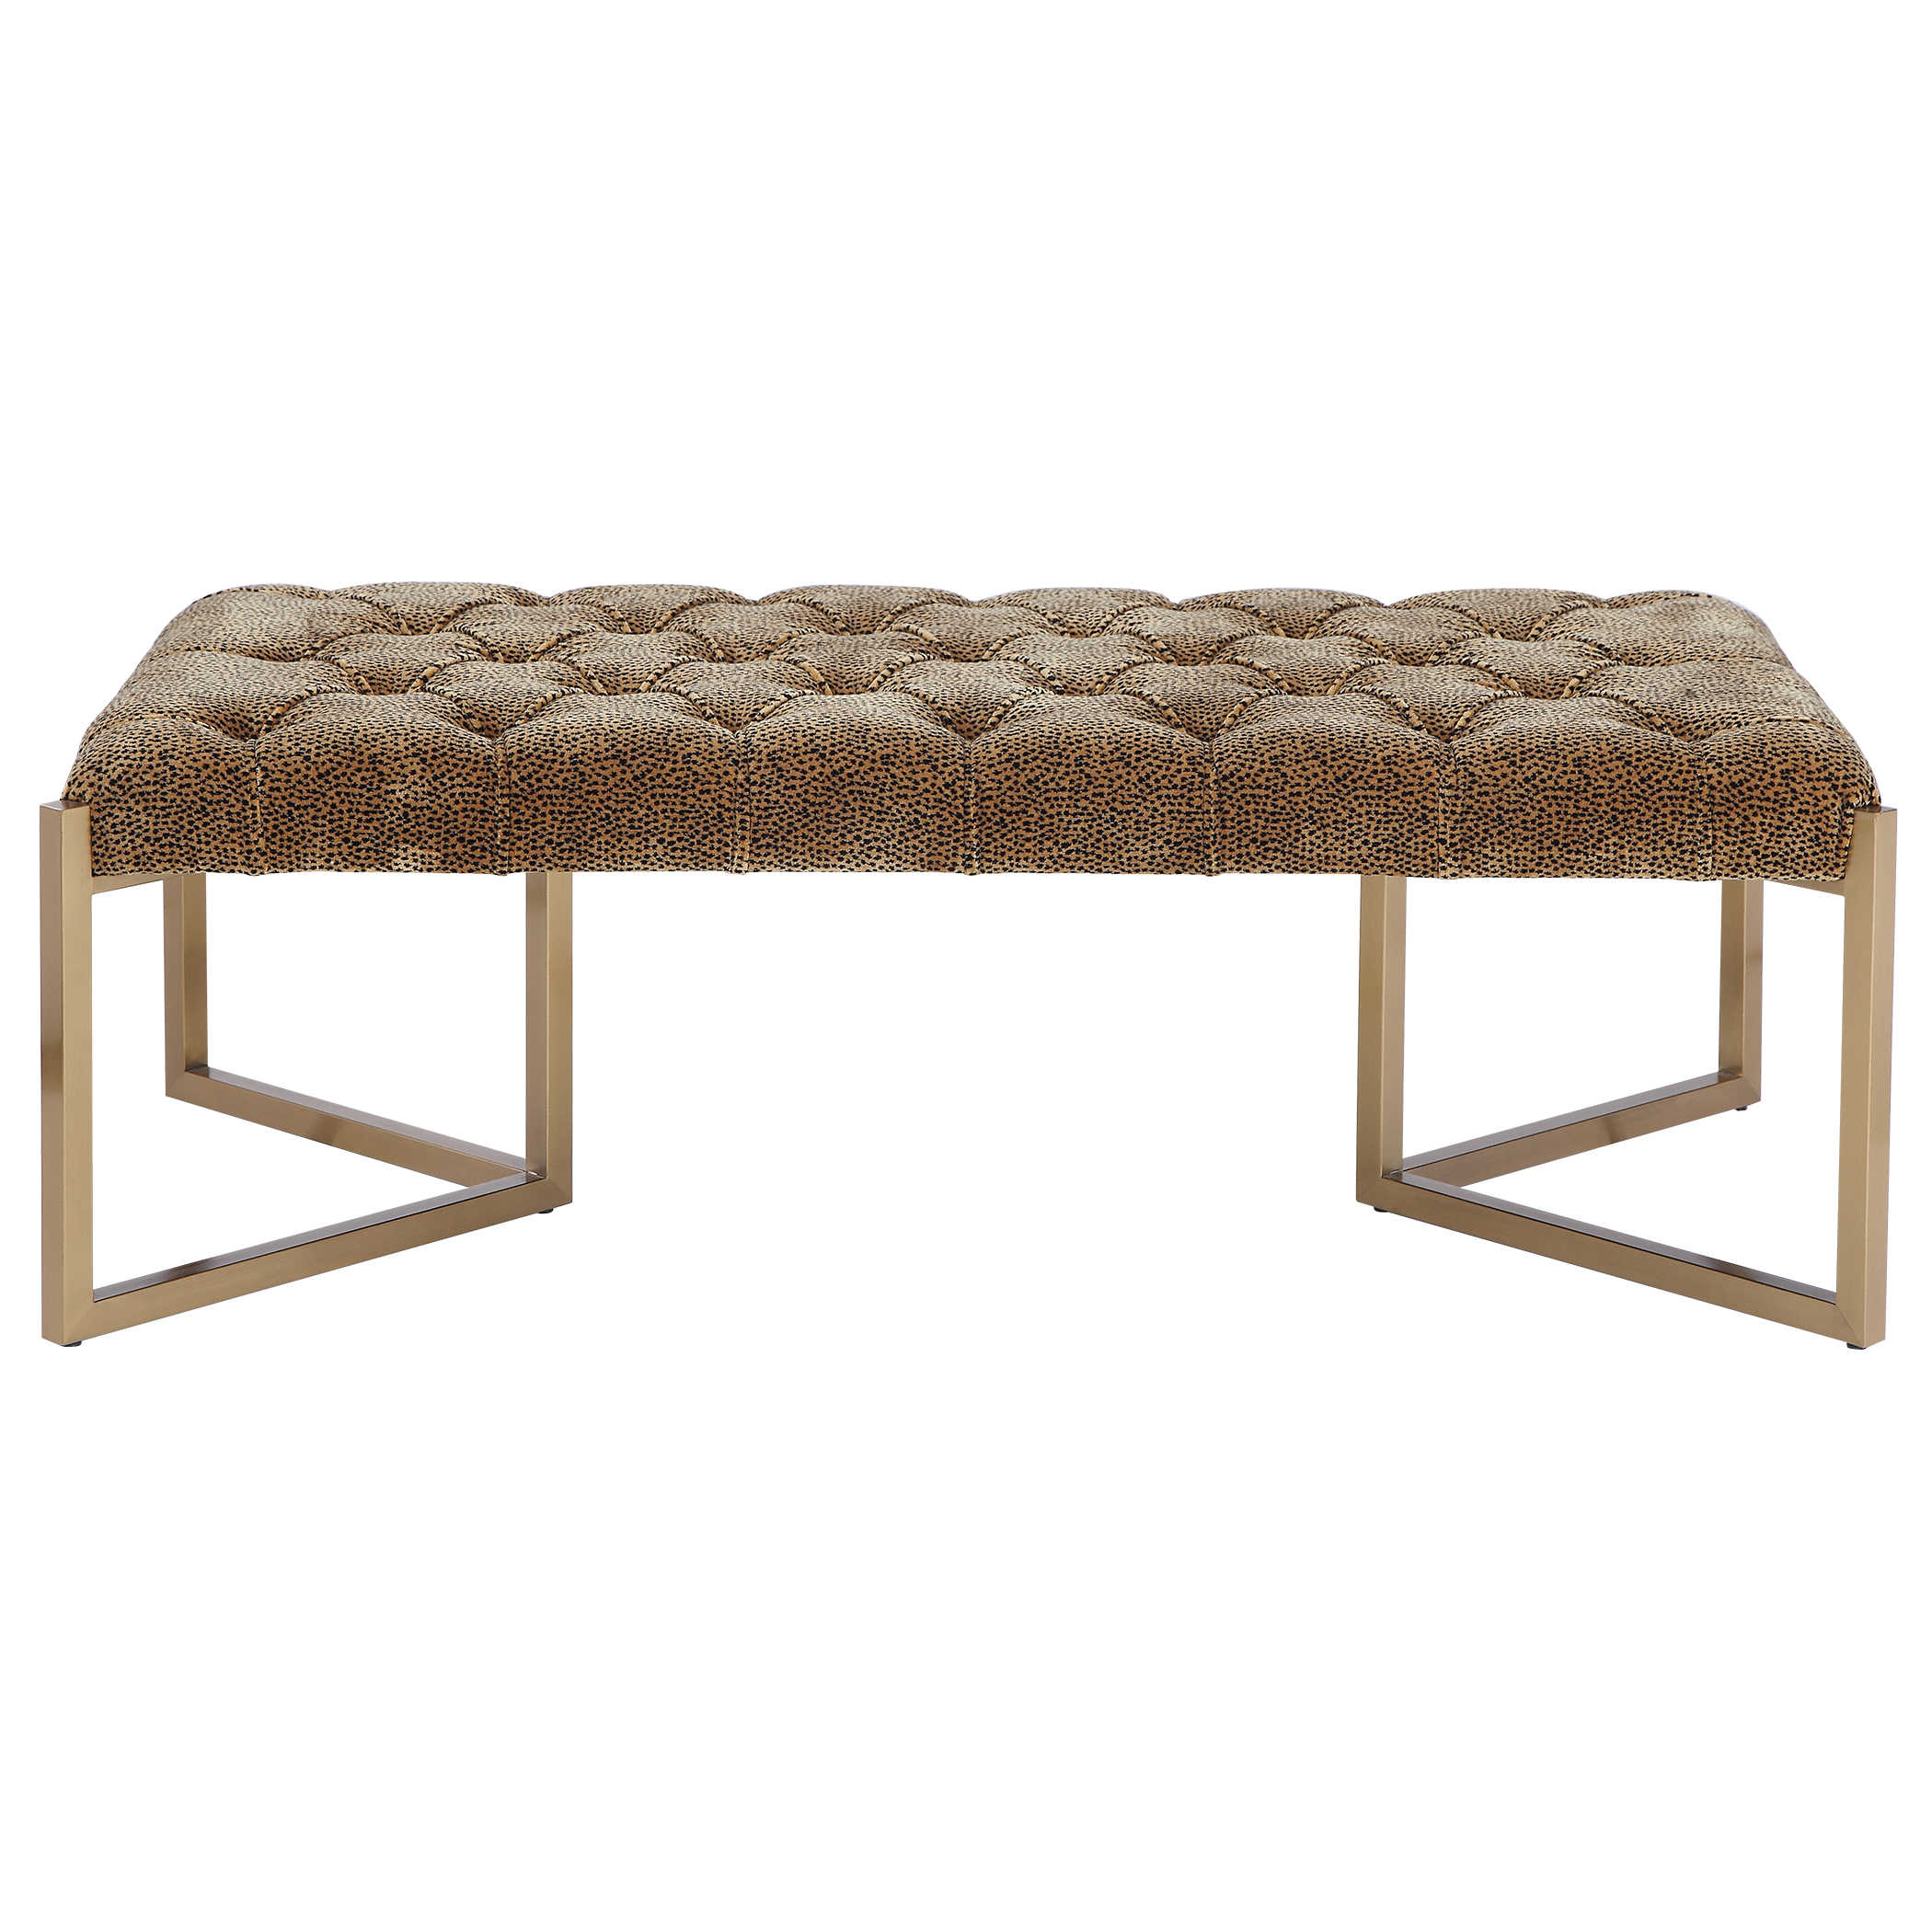 Tufted Leopard Bench With Gold Legs Nuance Interior Designs